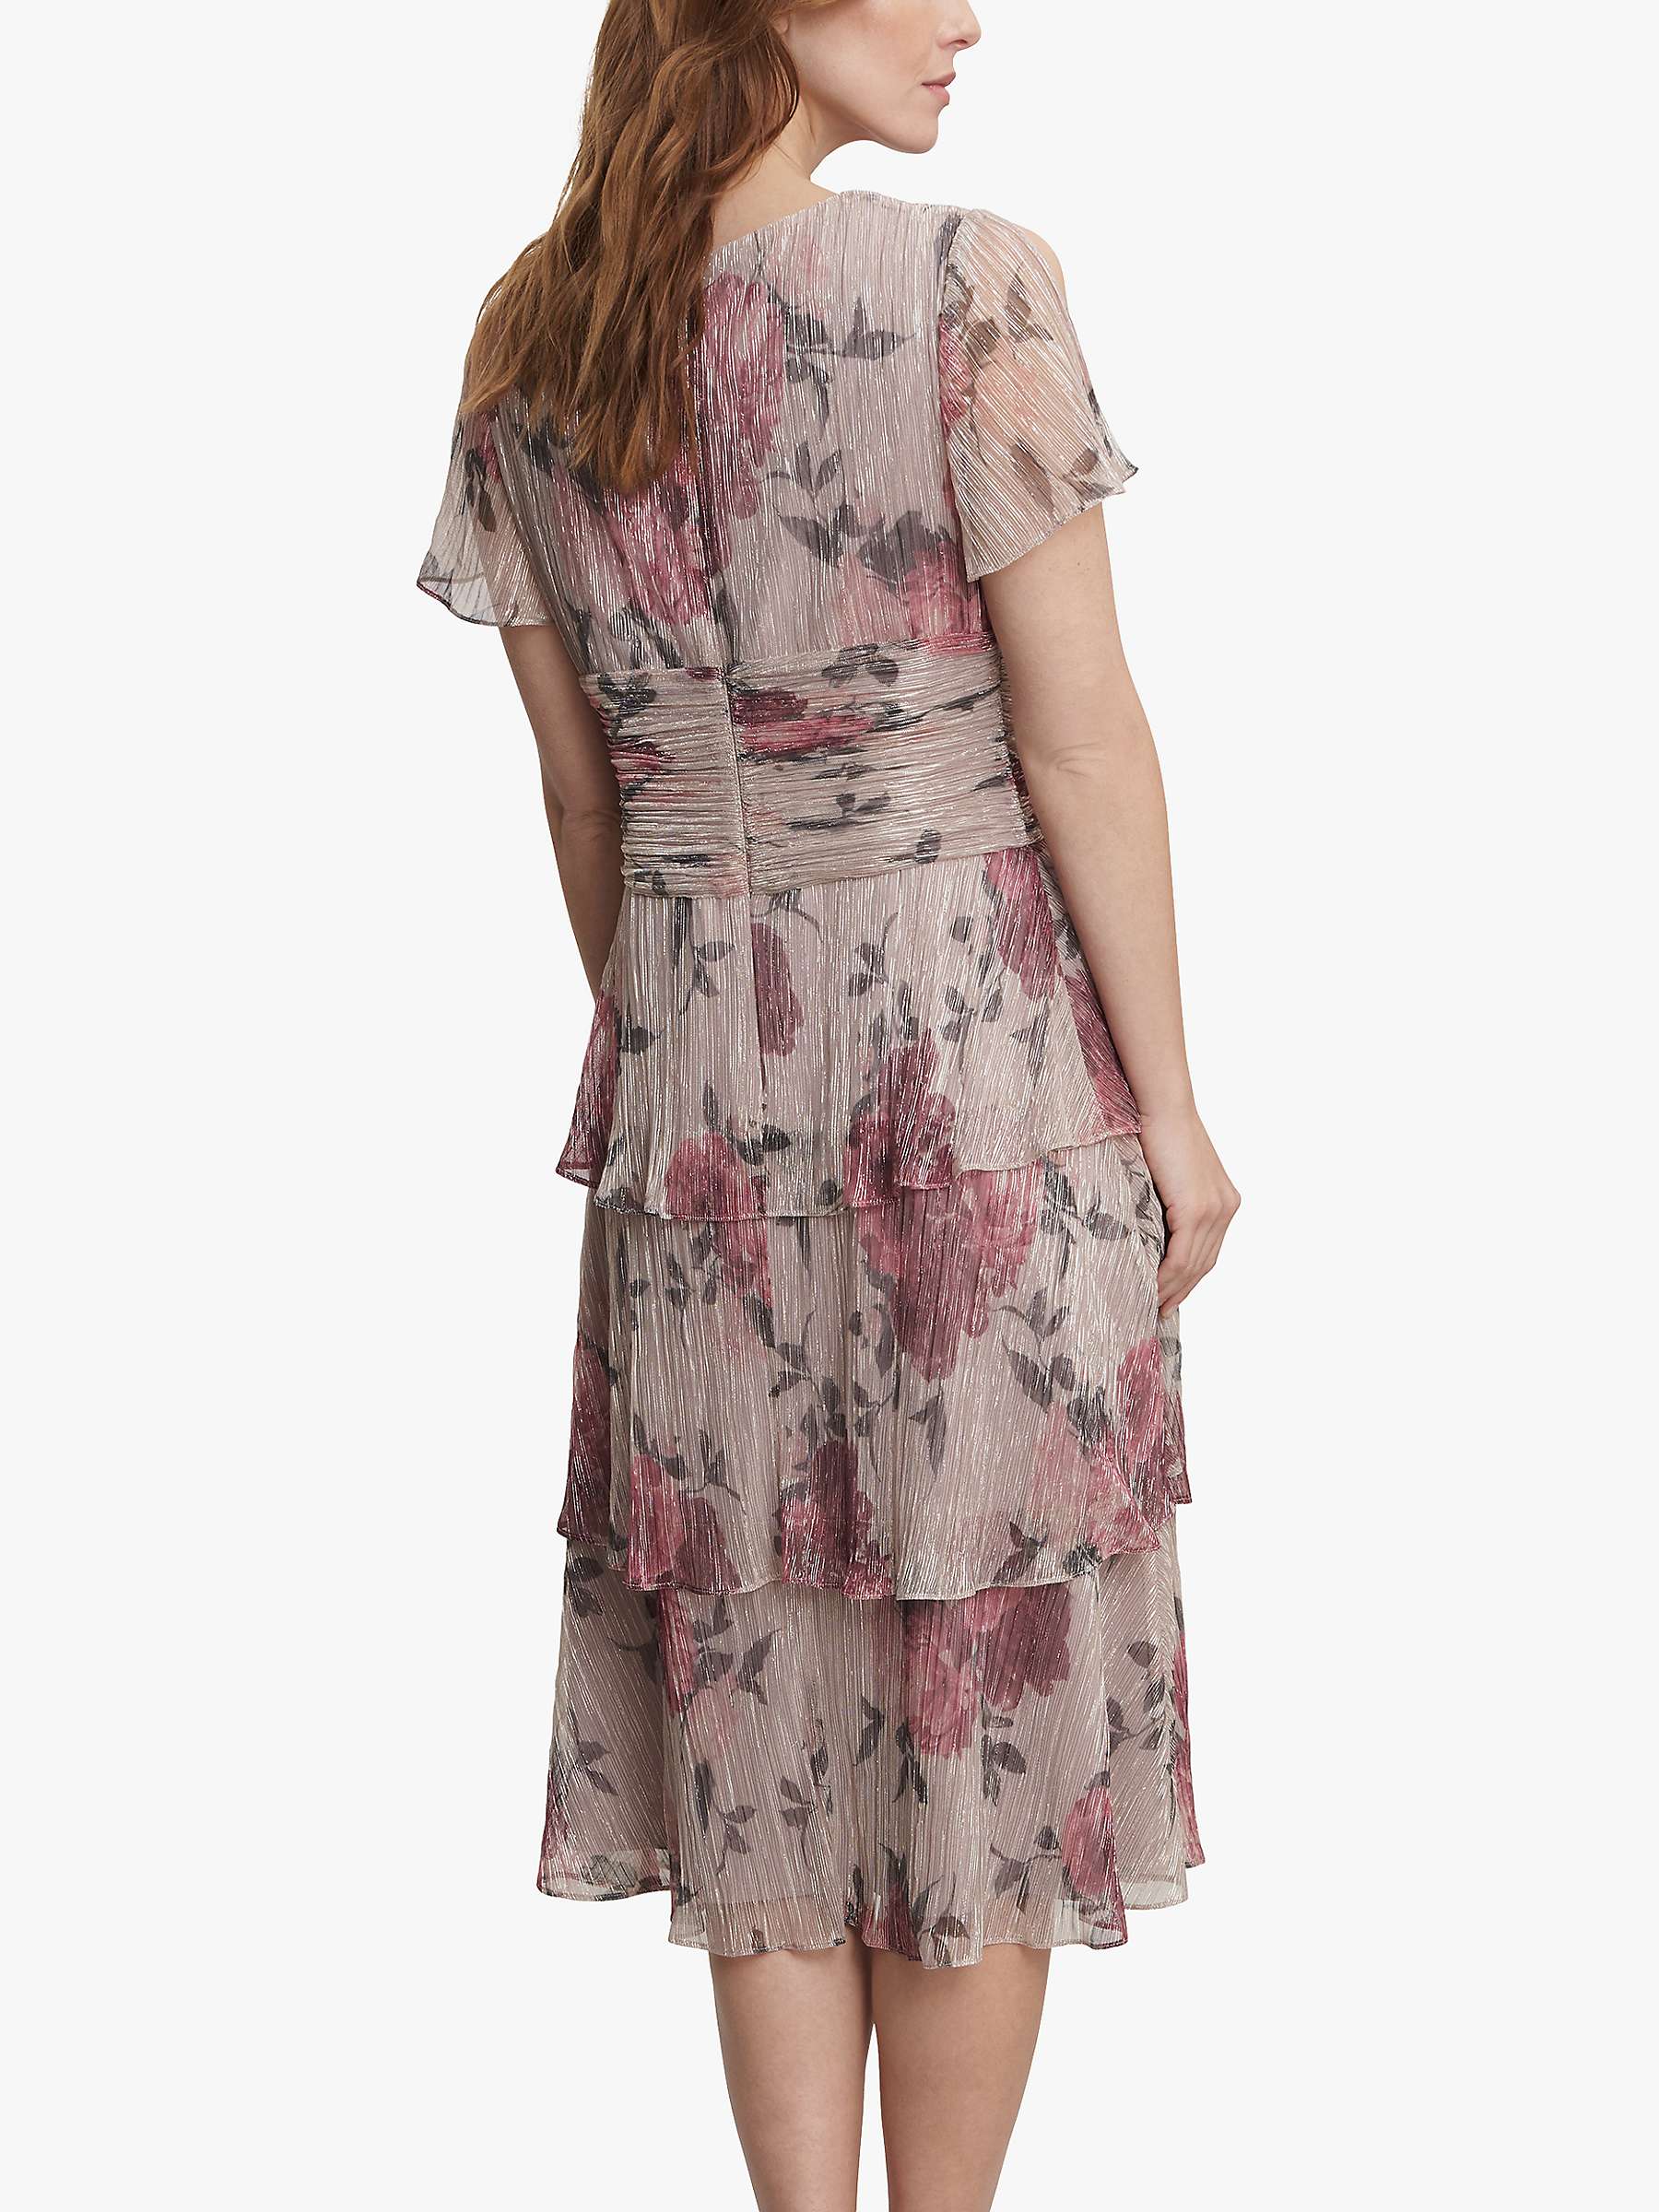 Buy Gina Bacconi Cher Floral Tiered Midi Dress, Blush/Multi Online at johnlewis.com